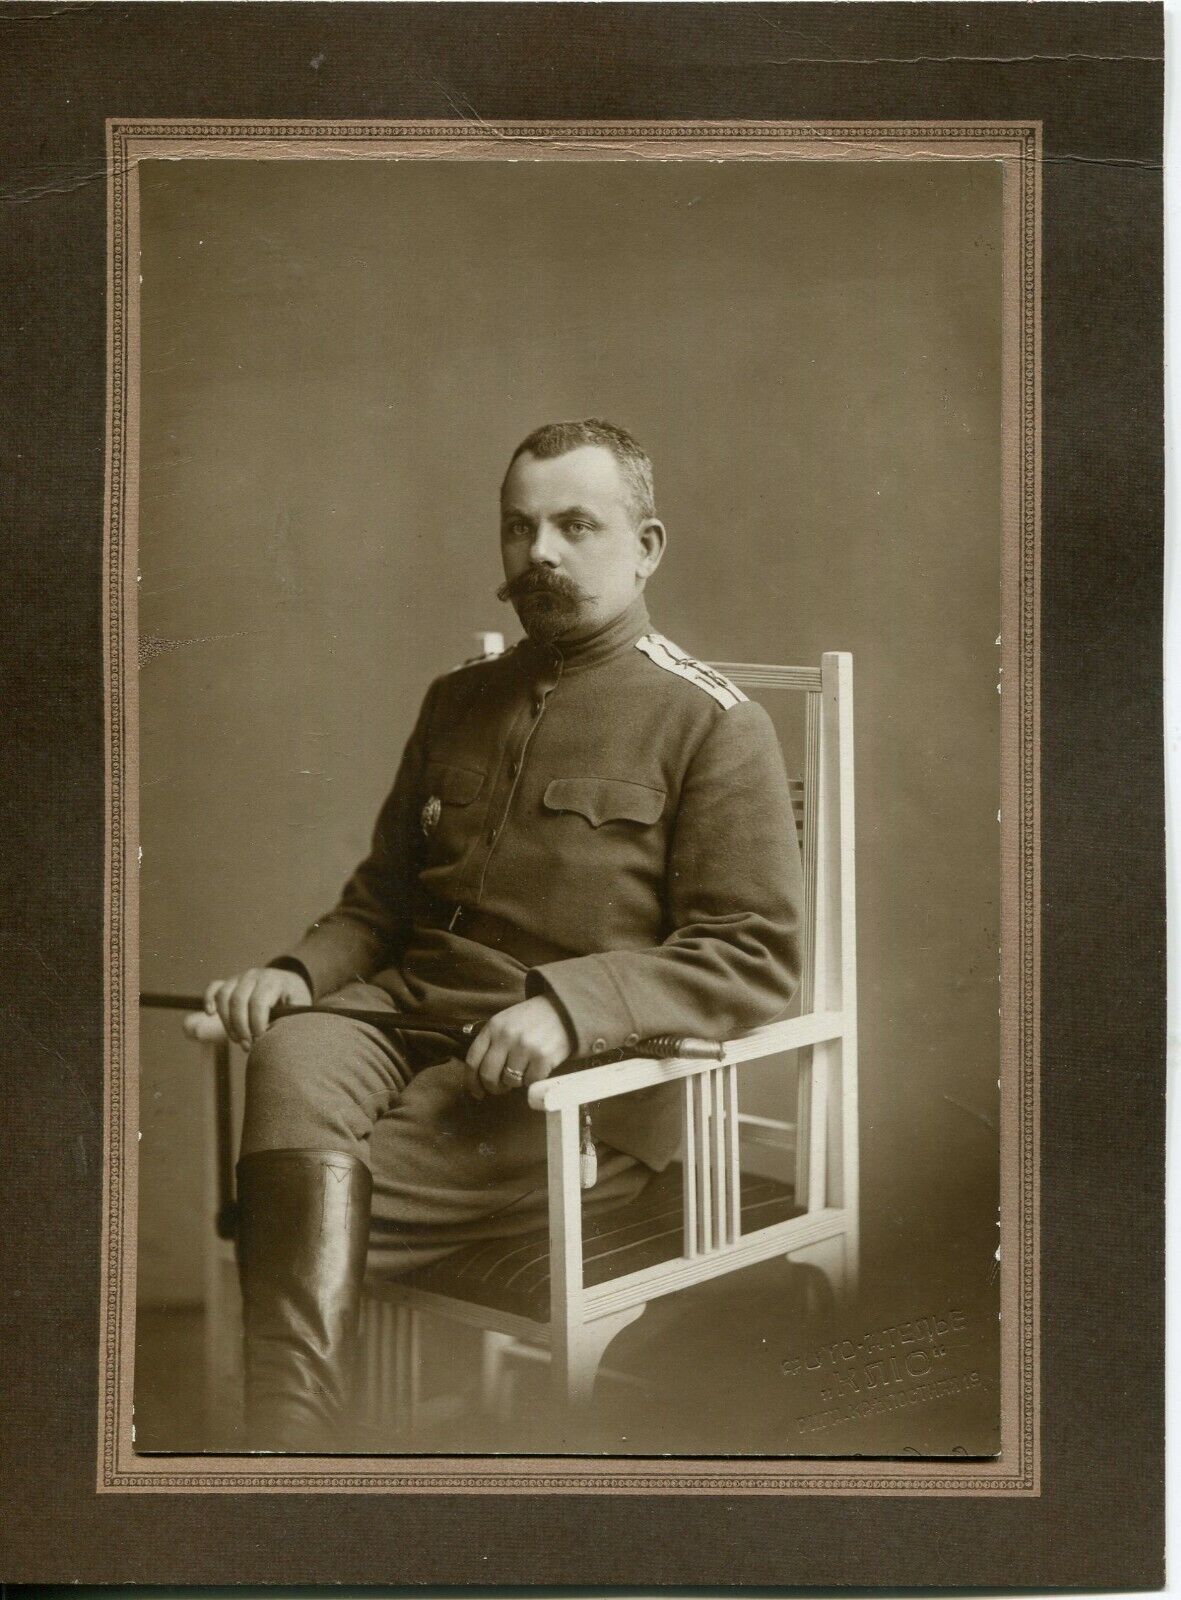 /Military Photo Russia pre ww1 Officer Sapper Engineer